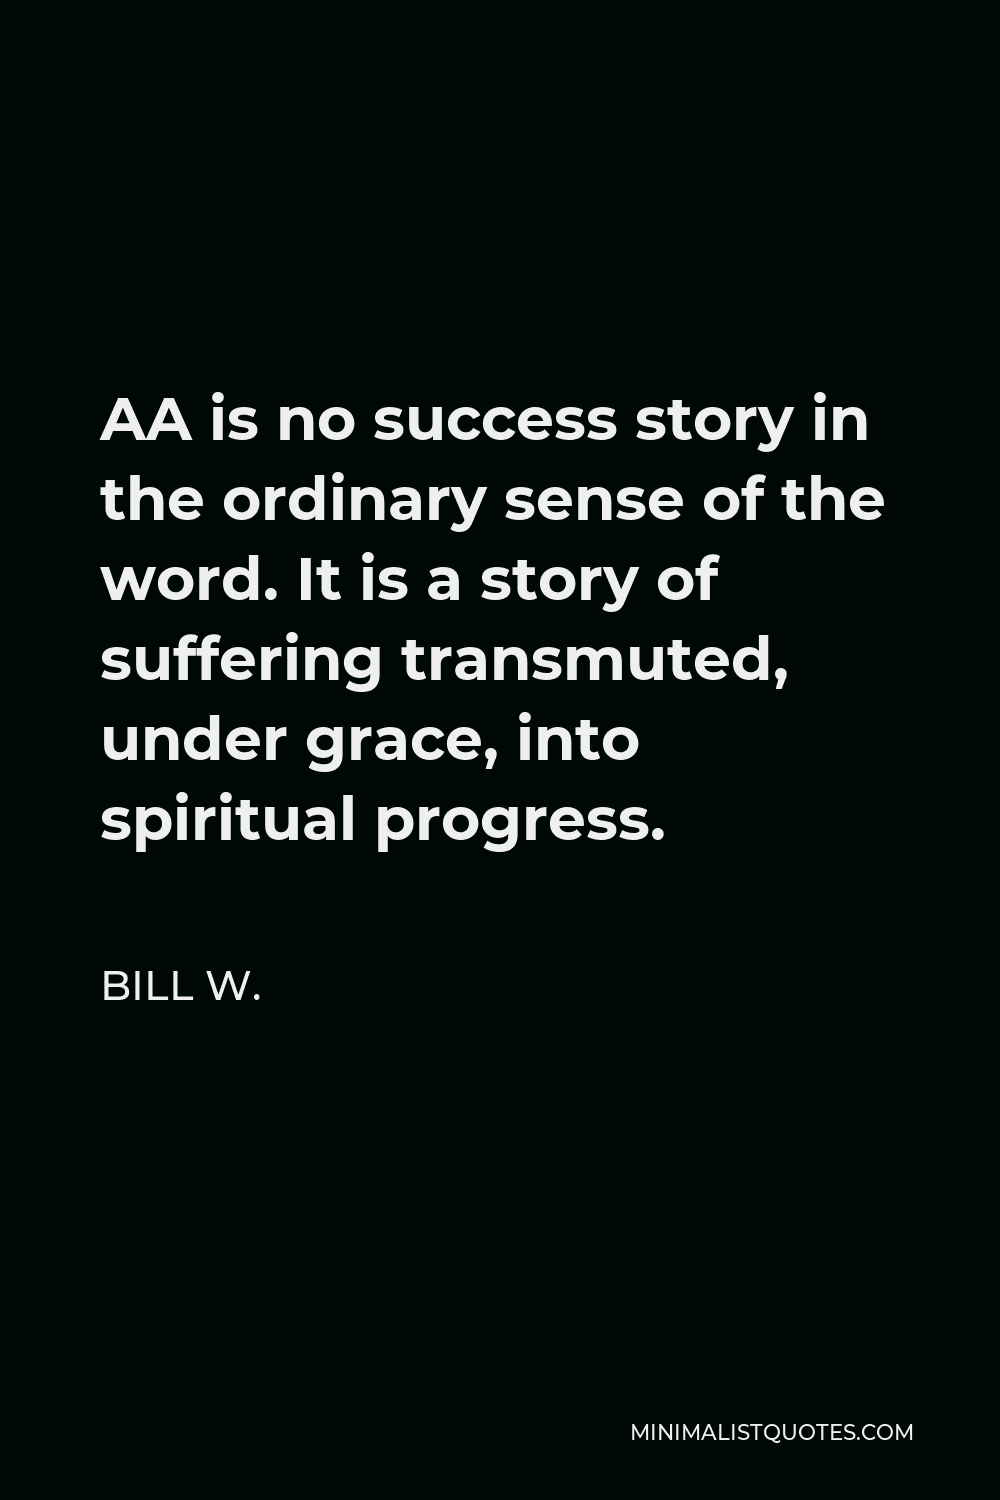 Bill W. Quote - AA is no success story in the ordinary sense of the word. It is a story of suffering transmuted, under grace, into spiritual progress.